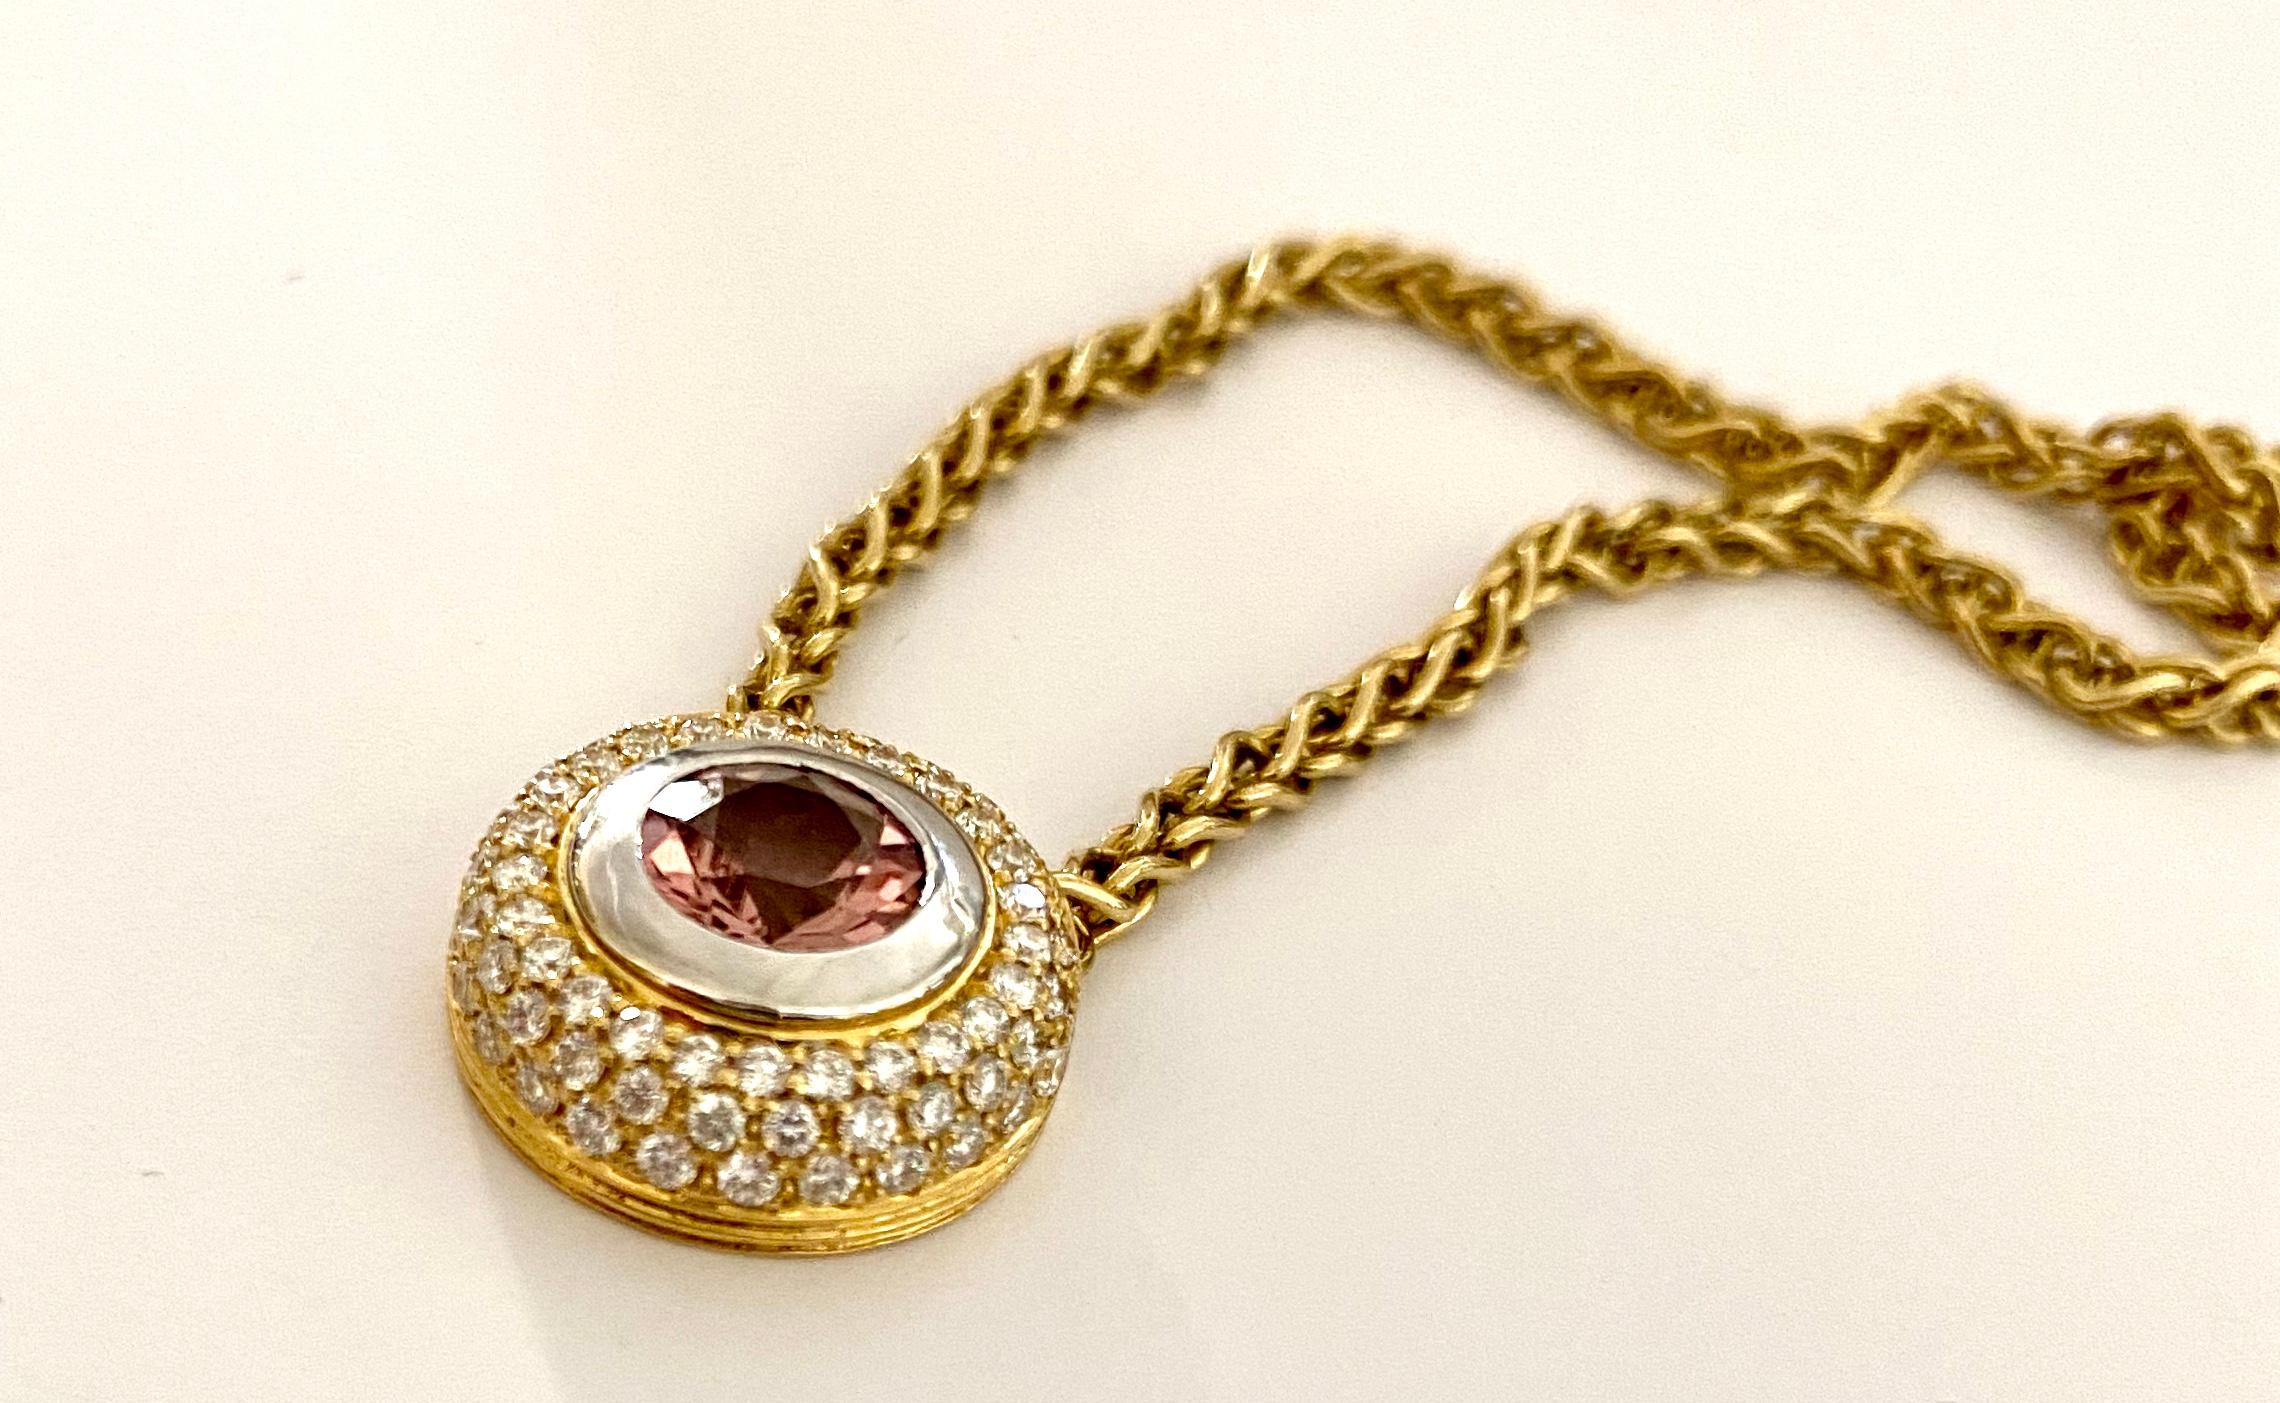 - 18K. yellow gold pendant (white gold setting) with a pink tourmaline (Rubelite) 1.80 ct.
- 66 brilliant cut diamonds weighting: 0.55 ct. VS f-G
- 18K. yellow gold braided round necklace, length 50 cm, weight: 14.13 grams
- Germany ca 1990